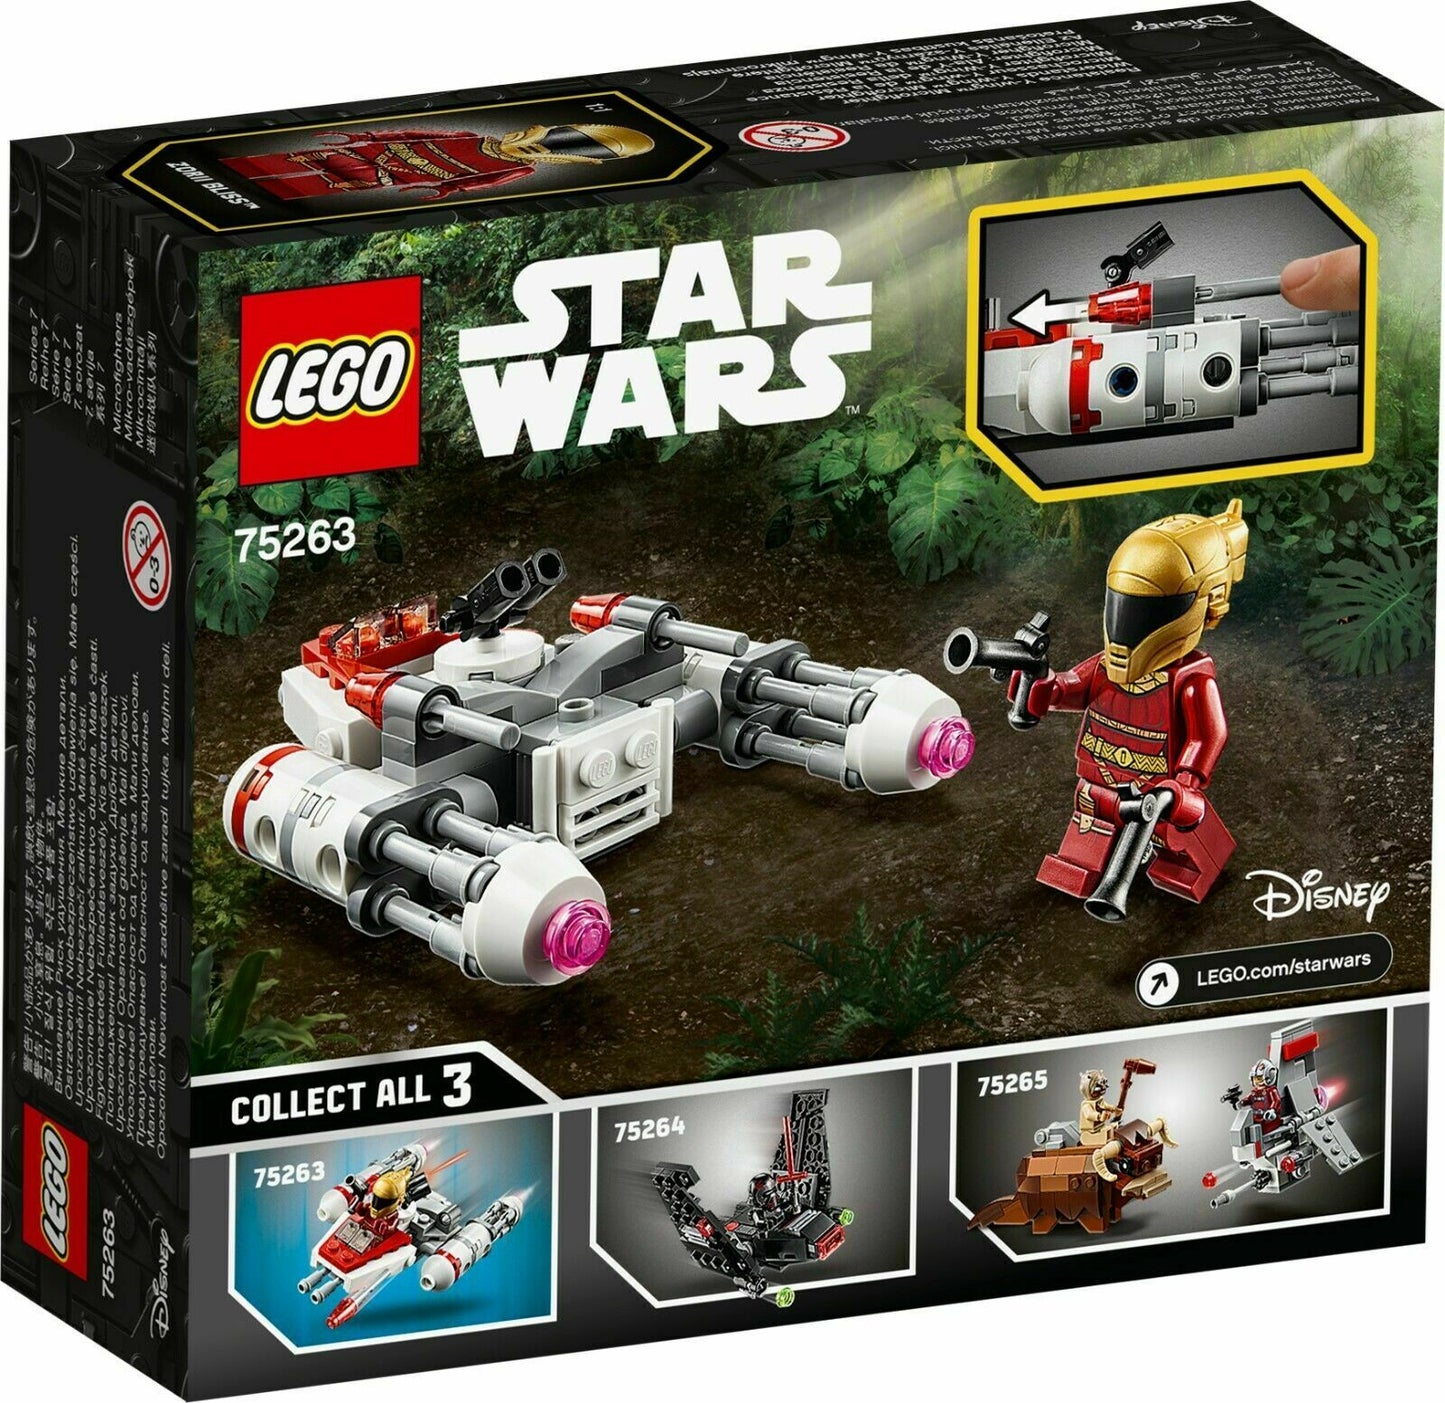 LEGO® Star Wars™ - 75263 Widerstands Y-Wing Microfighter